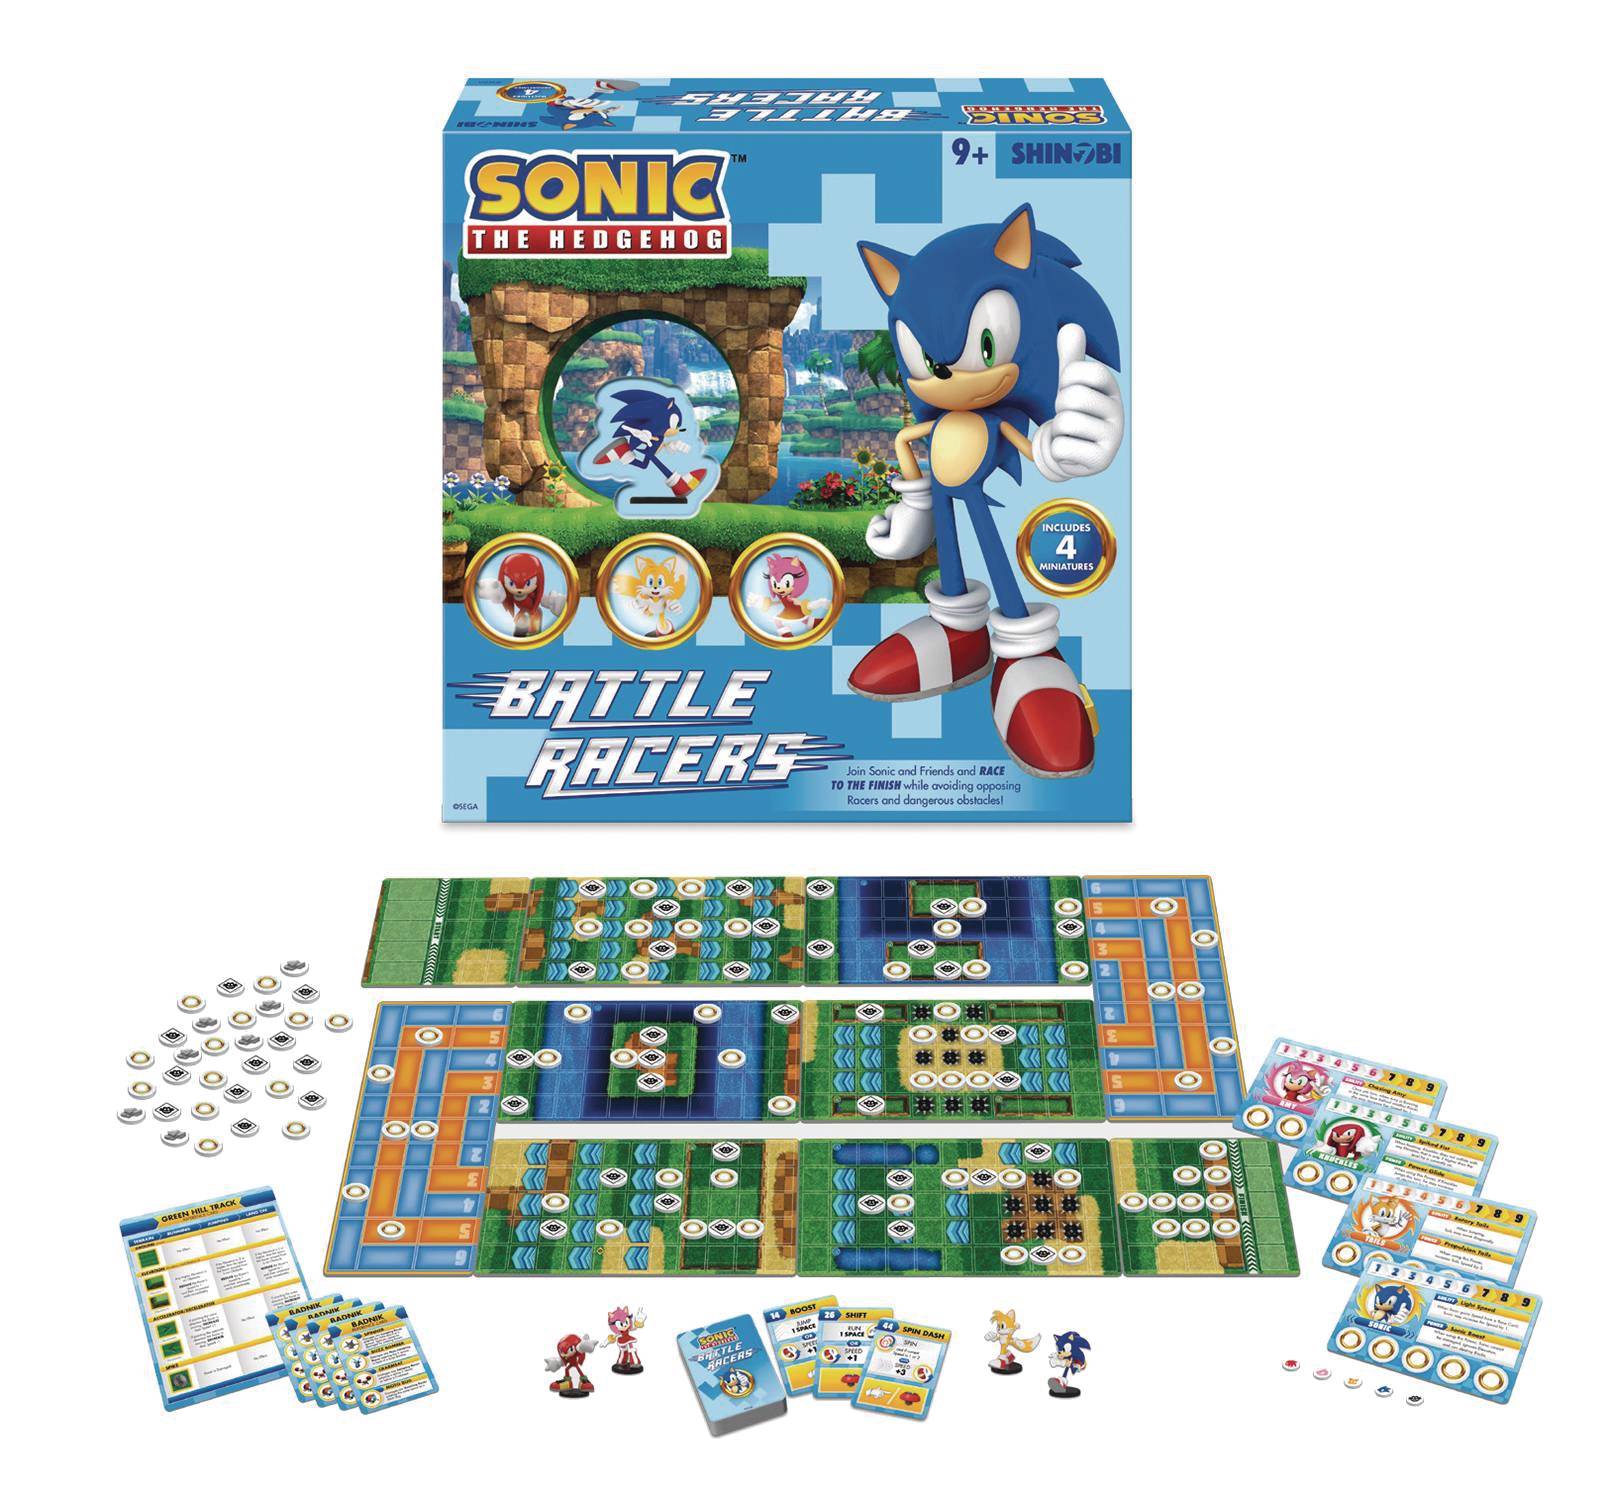 Sonic the Hedgehog Board Game - Sonic Battle - The Search for the